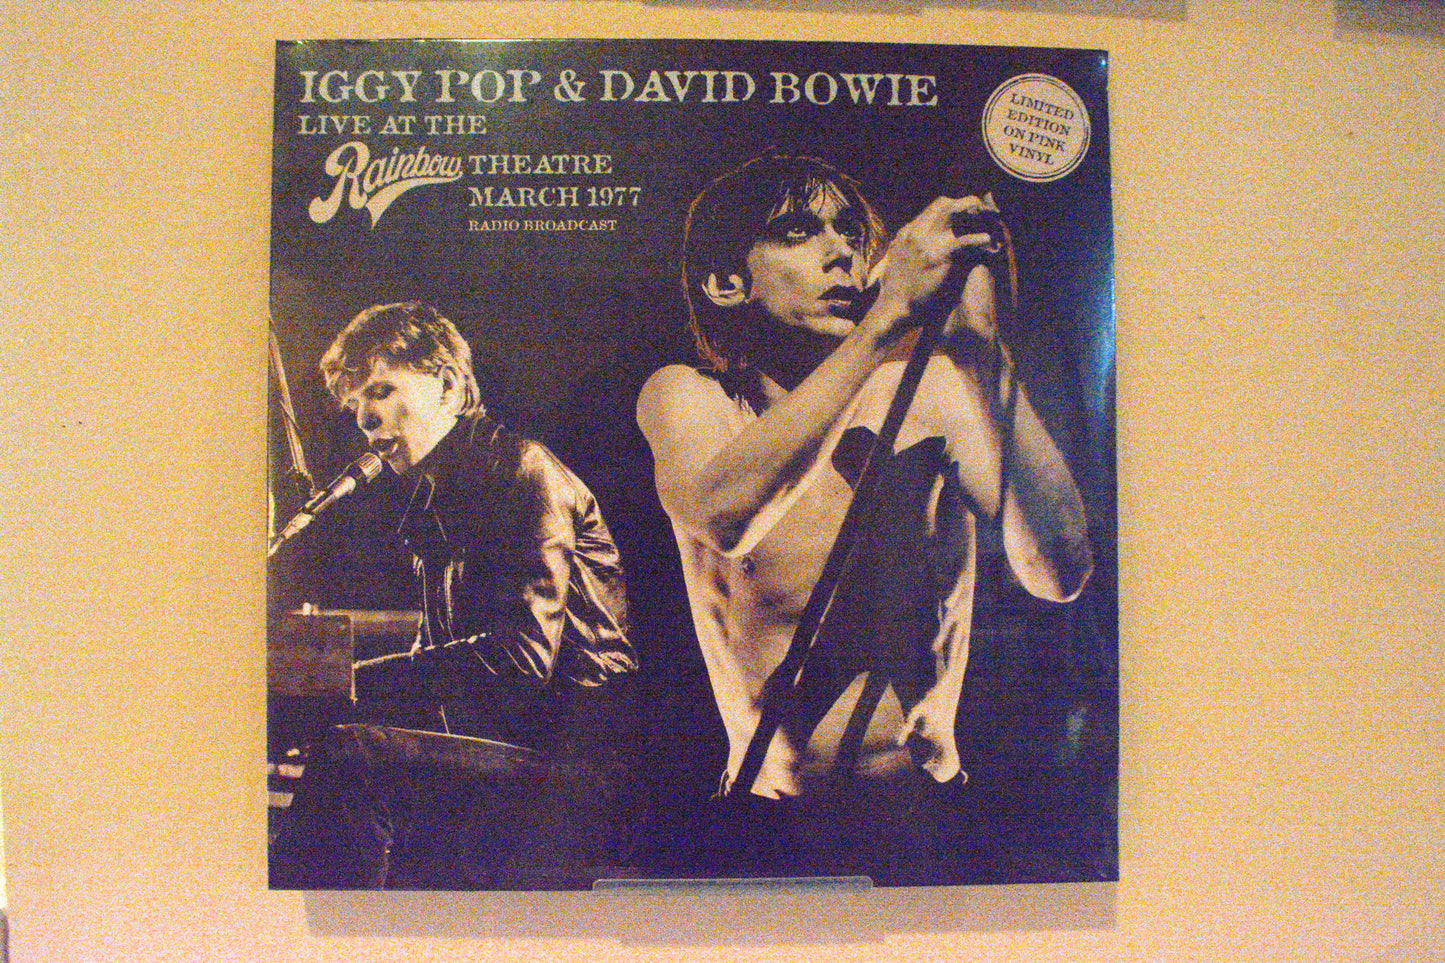 Iggy Pop & David Bowie - Live at the Rainbow Theatre, March 1977 LP